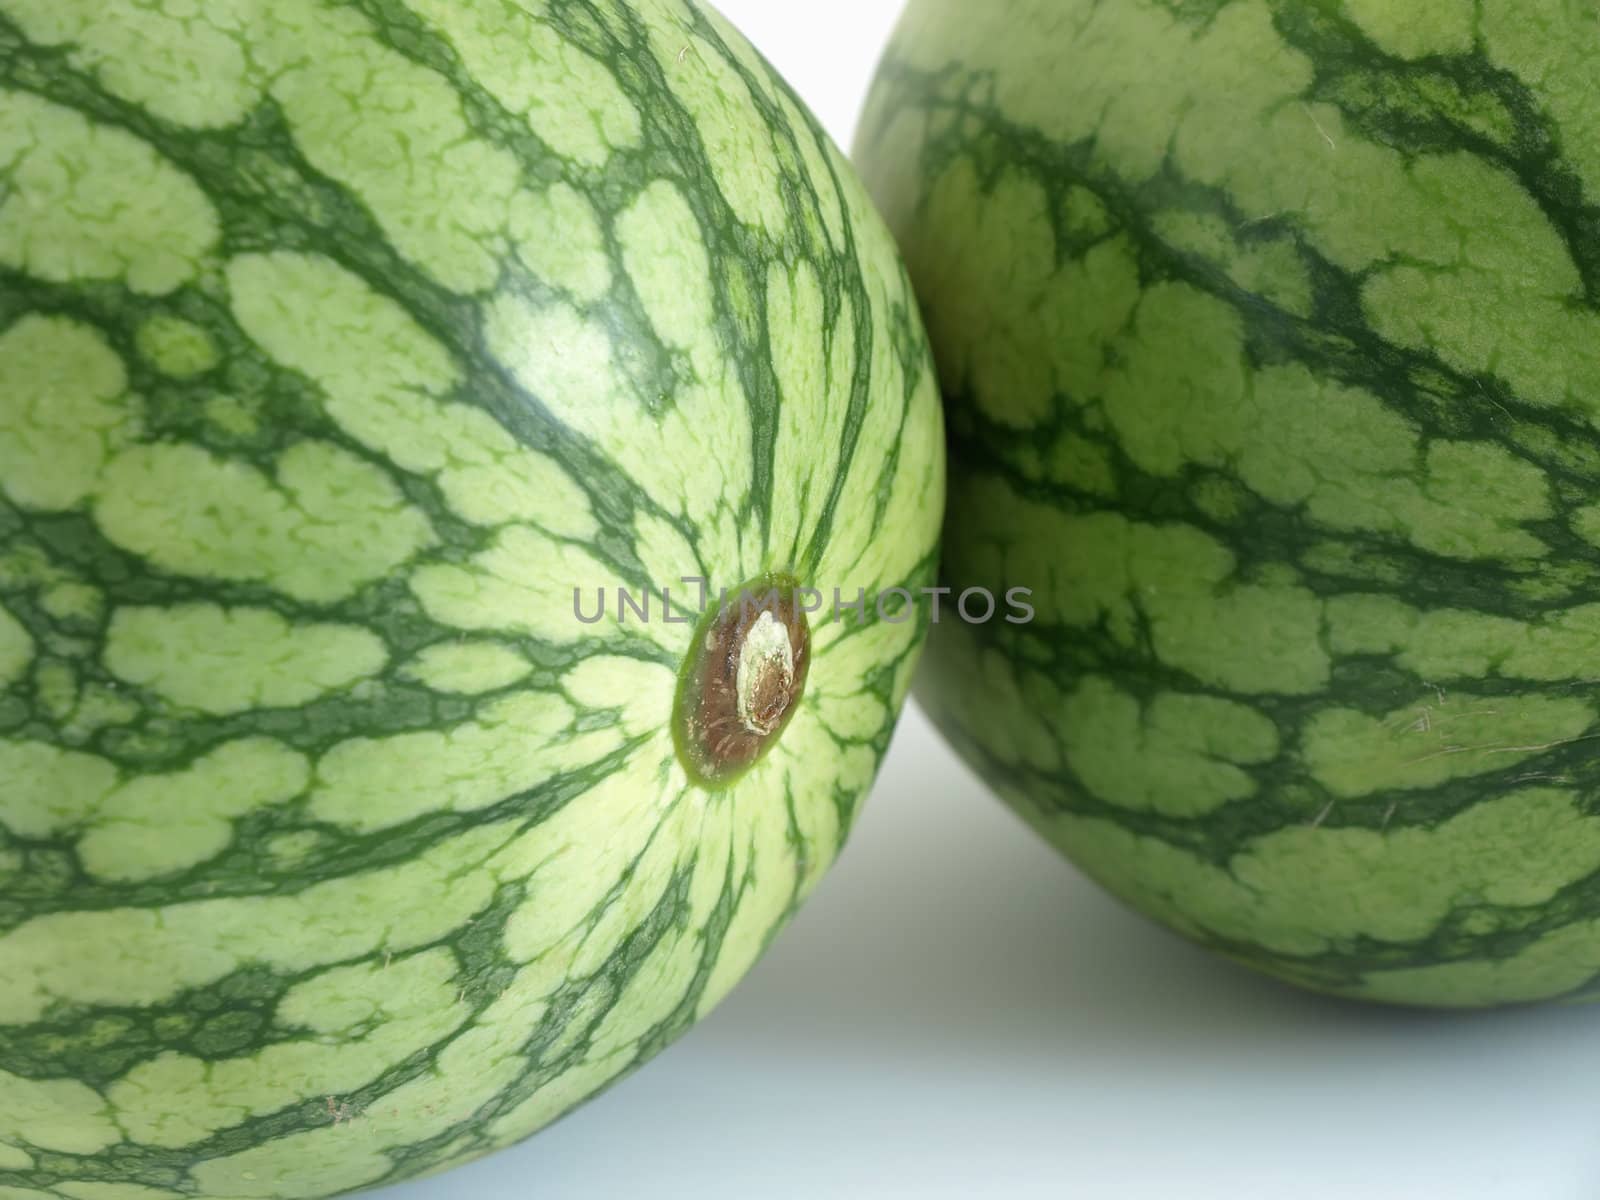 Two Melons in Close up by RGebbiePhoto